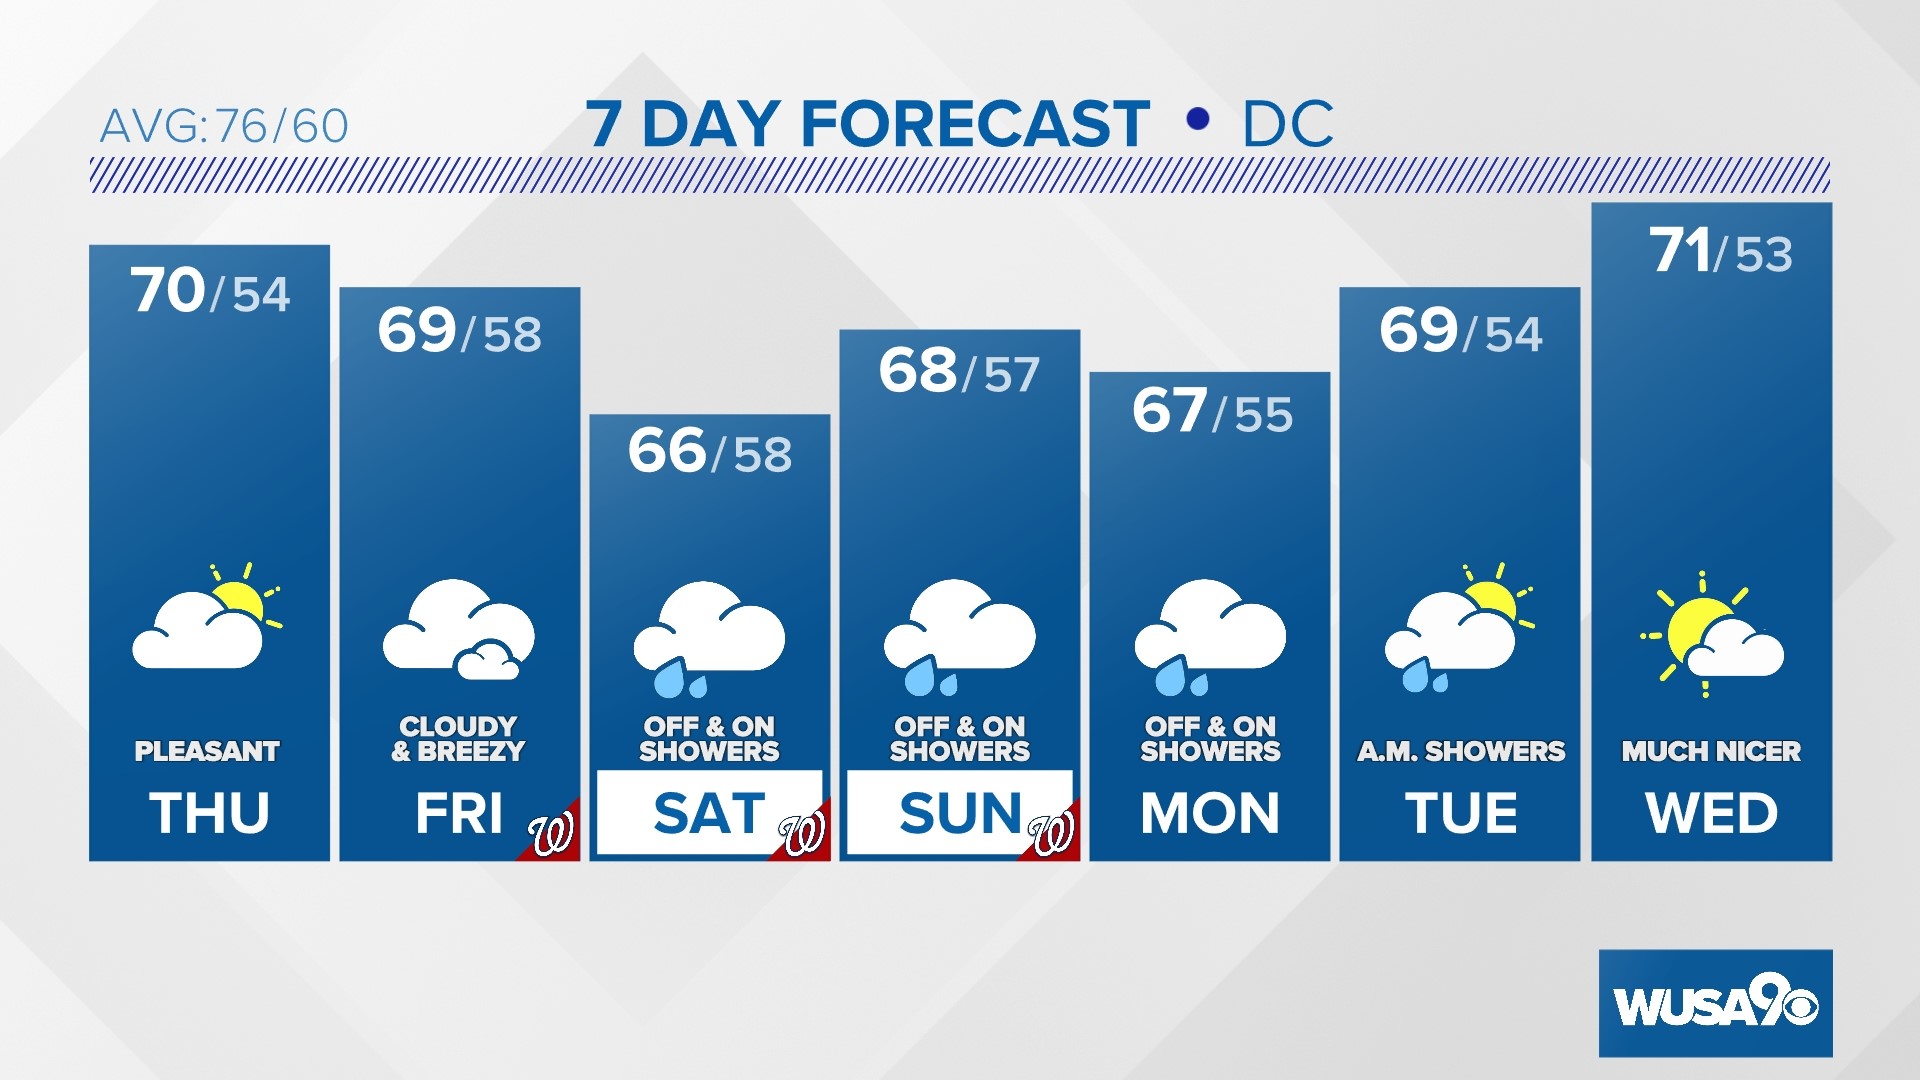 Tropical moisture from the remnants of Hurricane Ian will bring rain to the DMV this weekend.